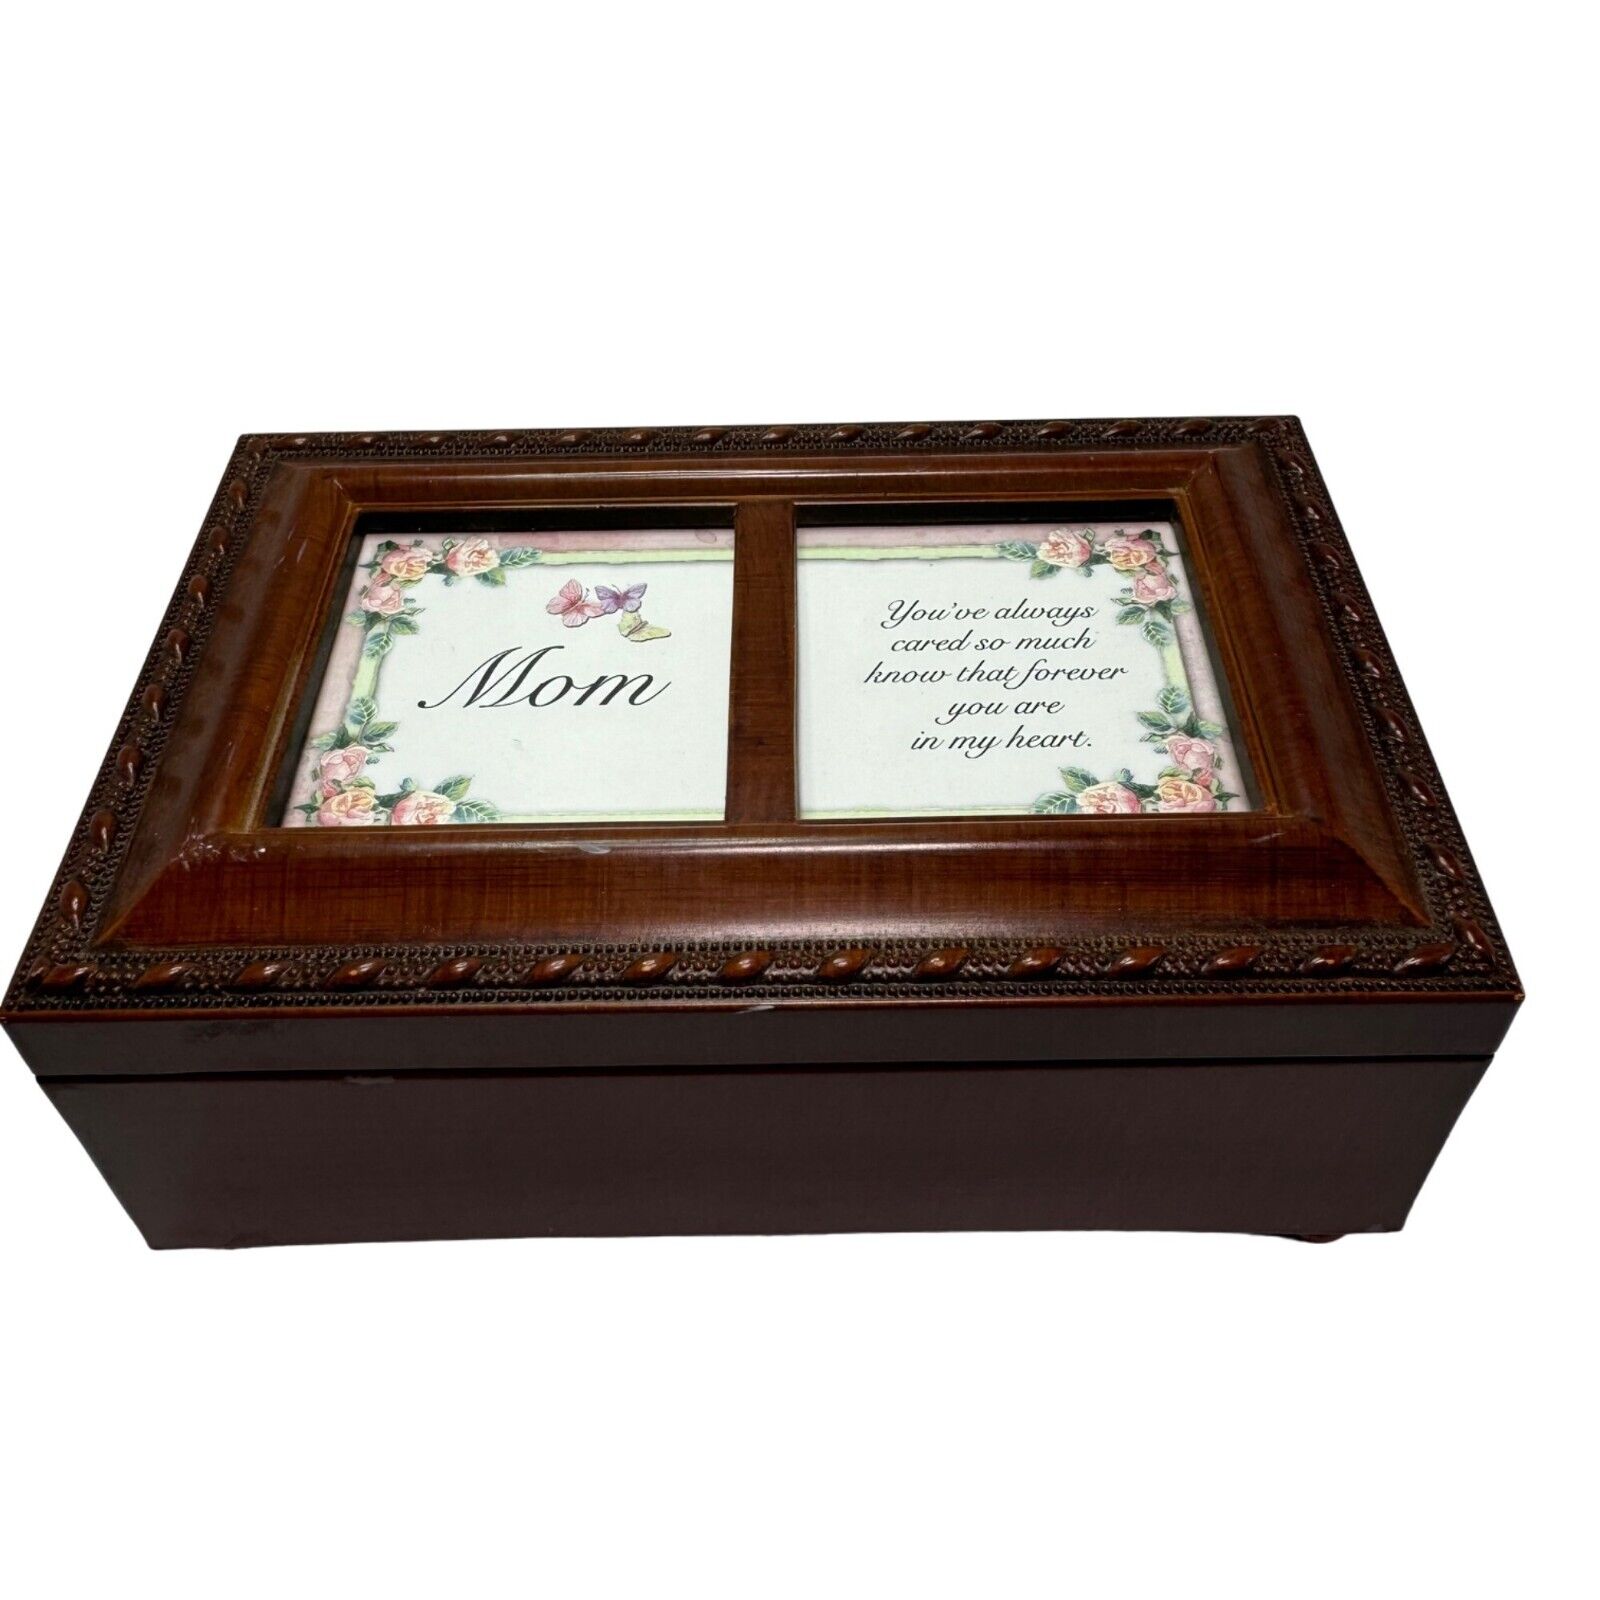 Sankyo Musical Jewelry Box Song Wind Beneath My Wings Mom Double Picture Frames